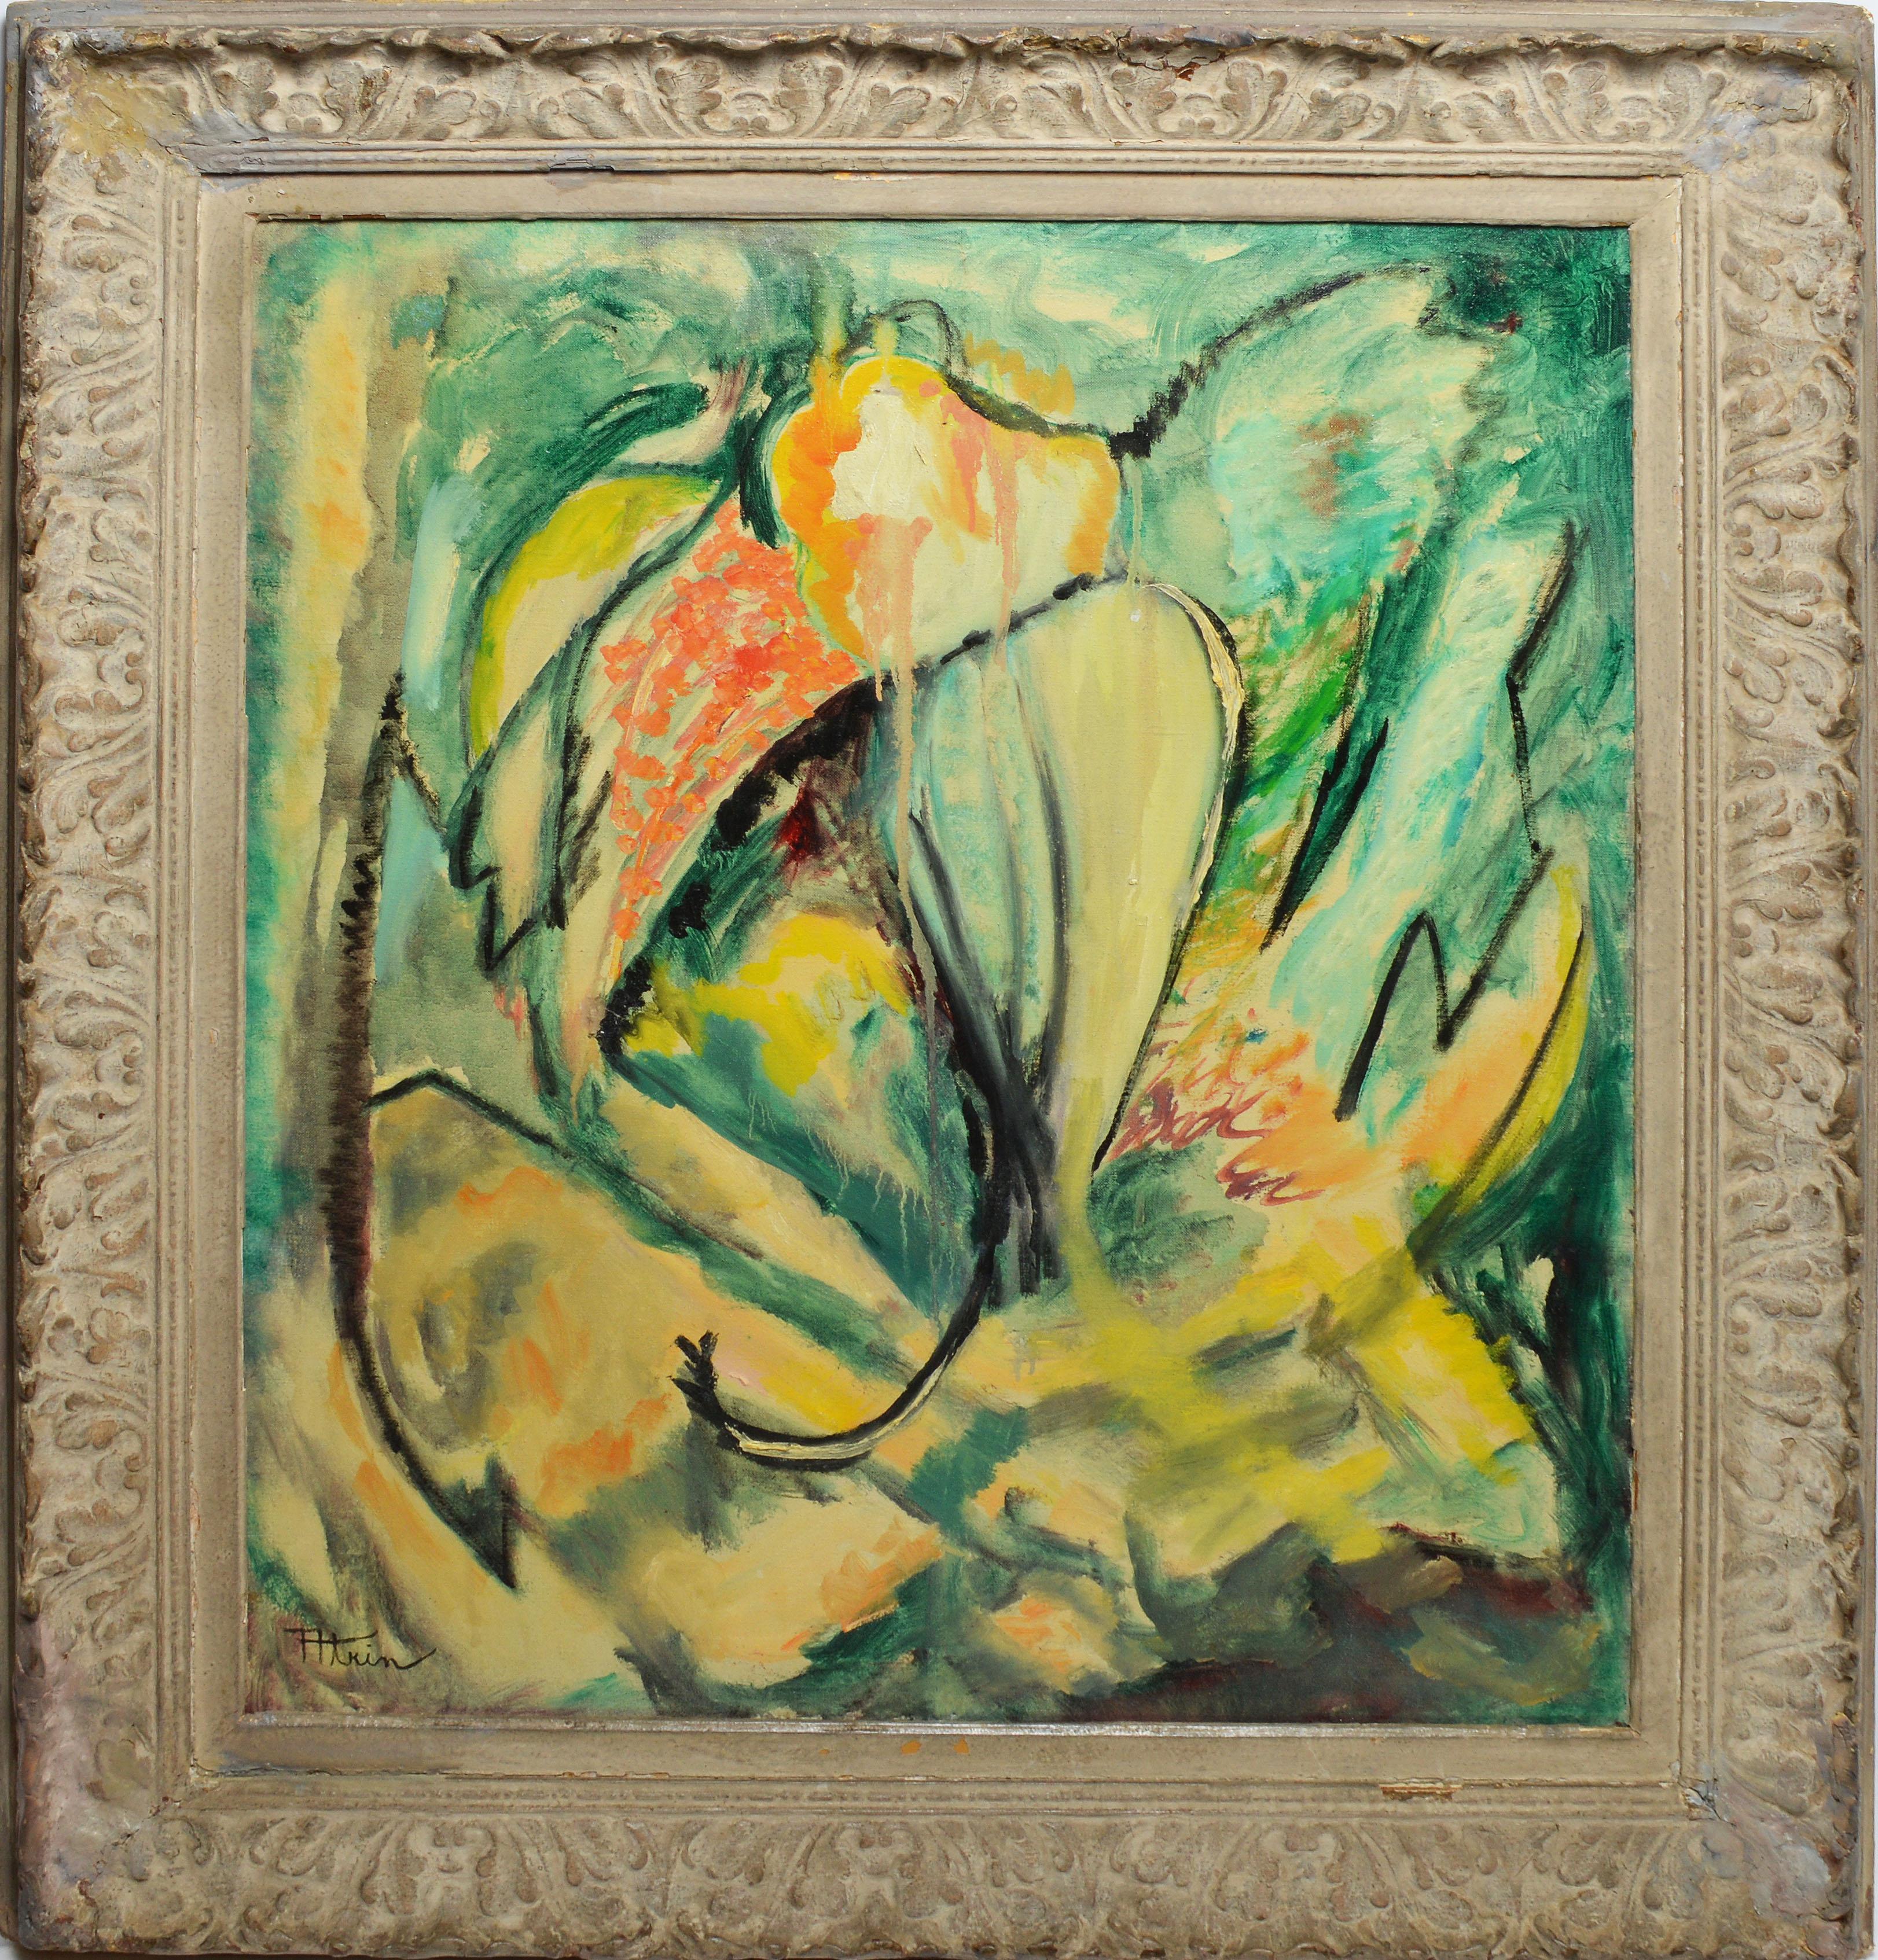 Modernist abstracted tropical landscape by New York City artist Mildred Tommy Atkin  (born 1903).  Oil on canvas, circa 1935.  Signed lower left.  Displayed in a period moderist frame.  Image size 25"L x 30"H, overall 33"L x 38"H.